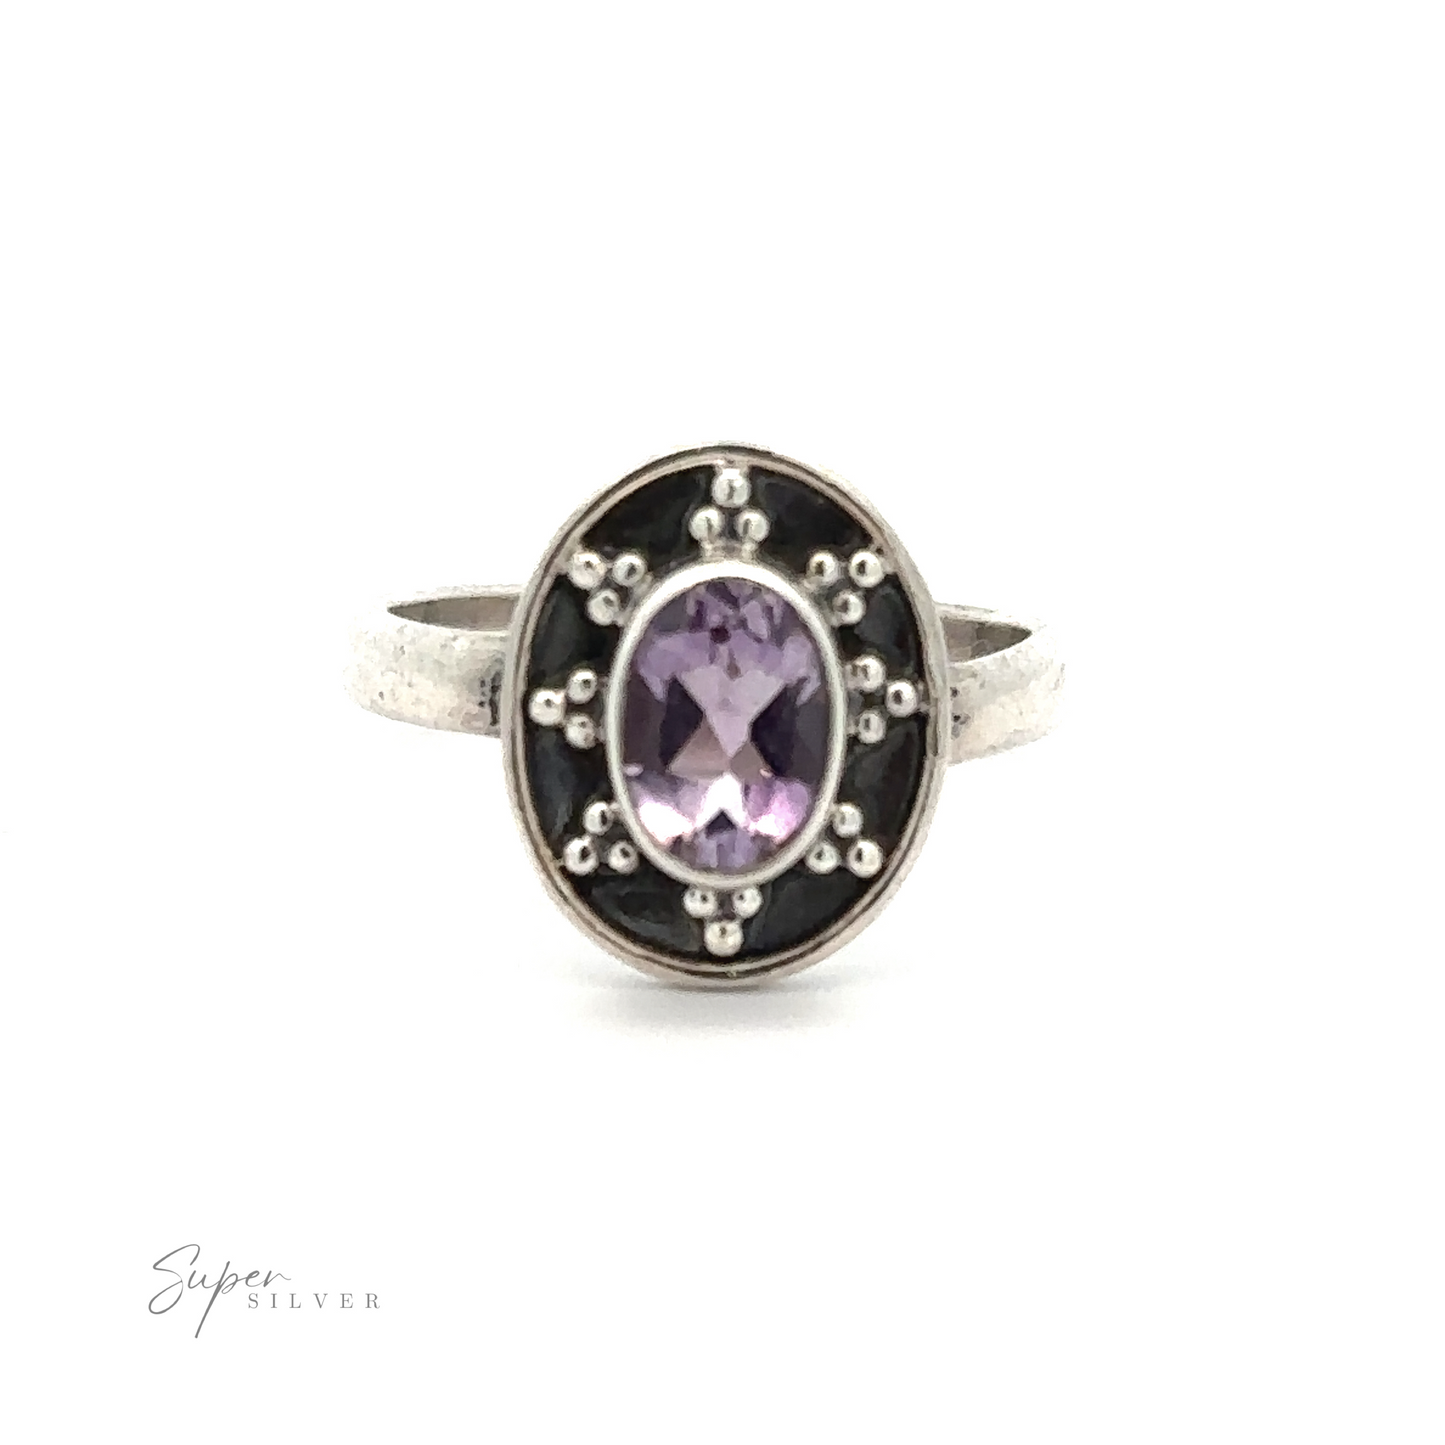 
                  
                    An Oval Gemstone Ring with Ball and Disk Border featuring an oval-shaped purple gemstone set in the center, surrounded by small silver bead details. This vintage-inspired jewelry piece stands out beautifully against the plain white background.
                  
                